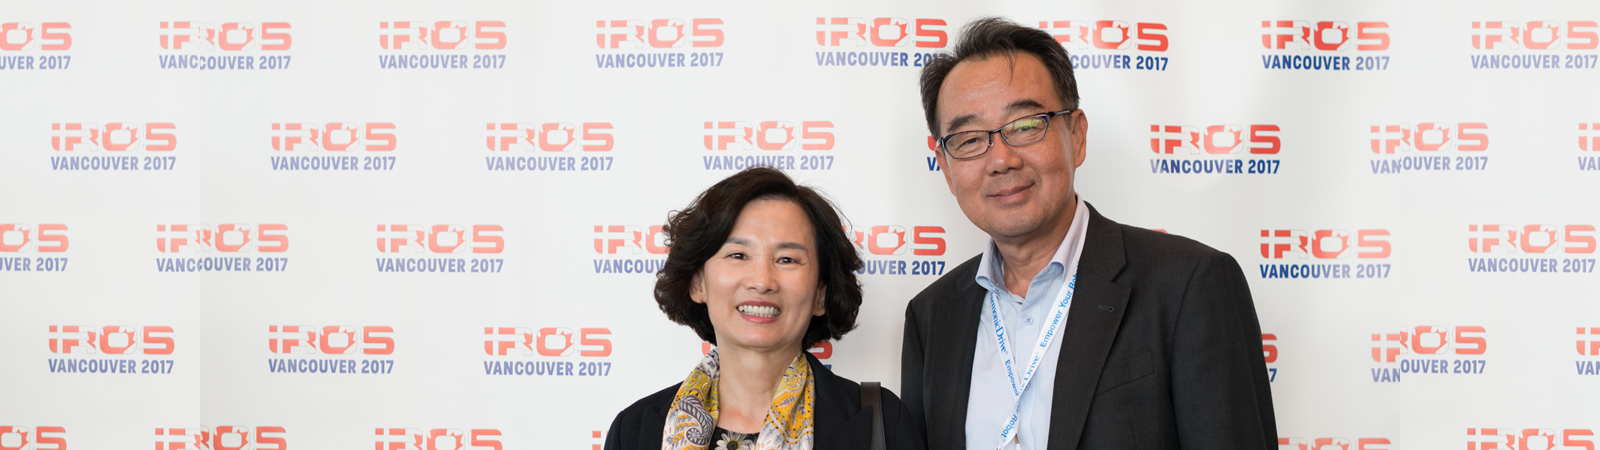 Thank You for Your Contributions to IROS 2017!